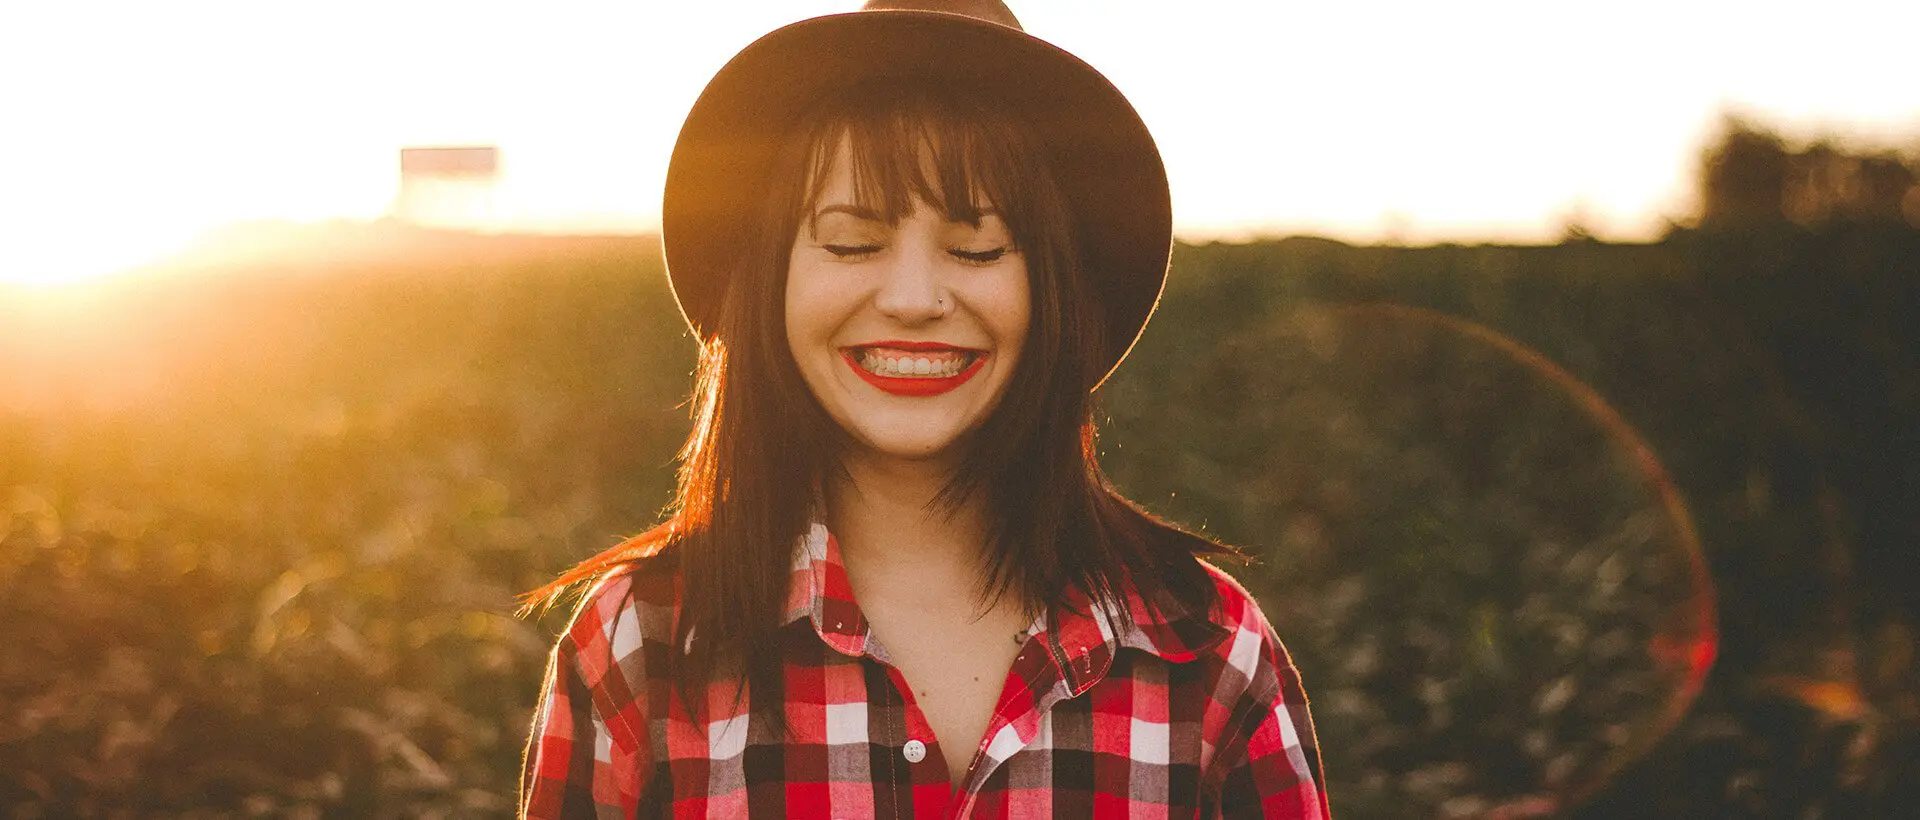 a woman in a plaid shirt and hat smiling.